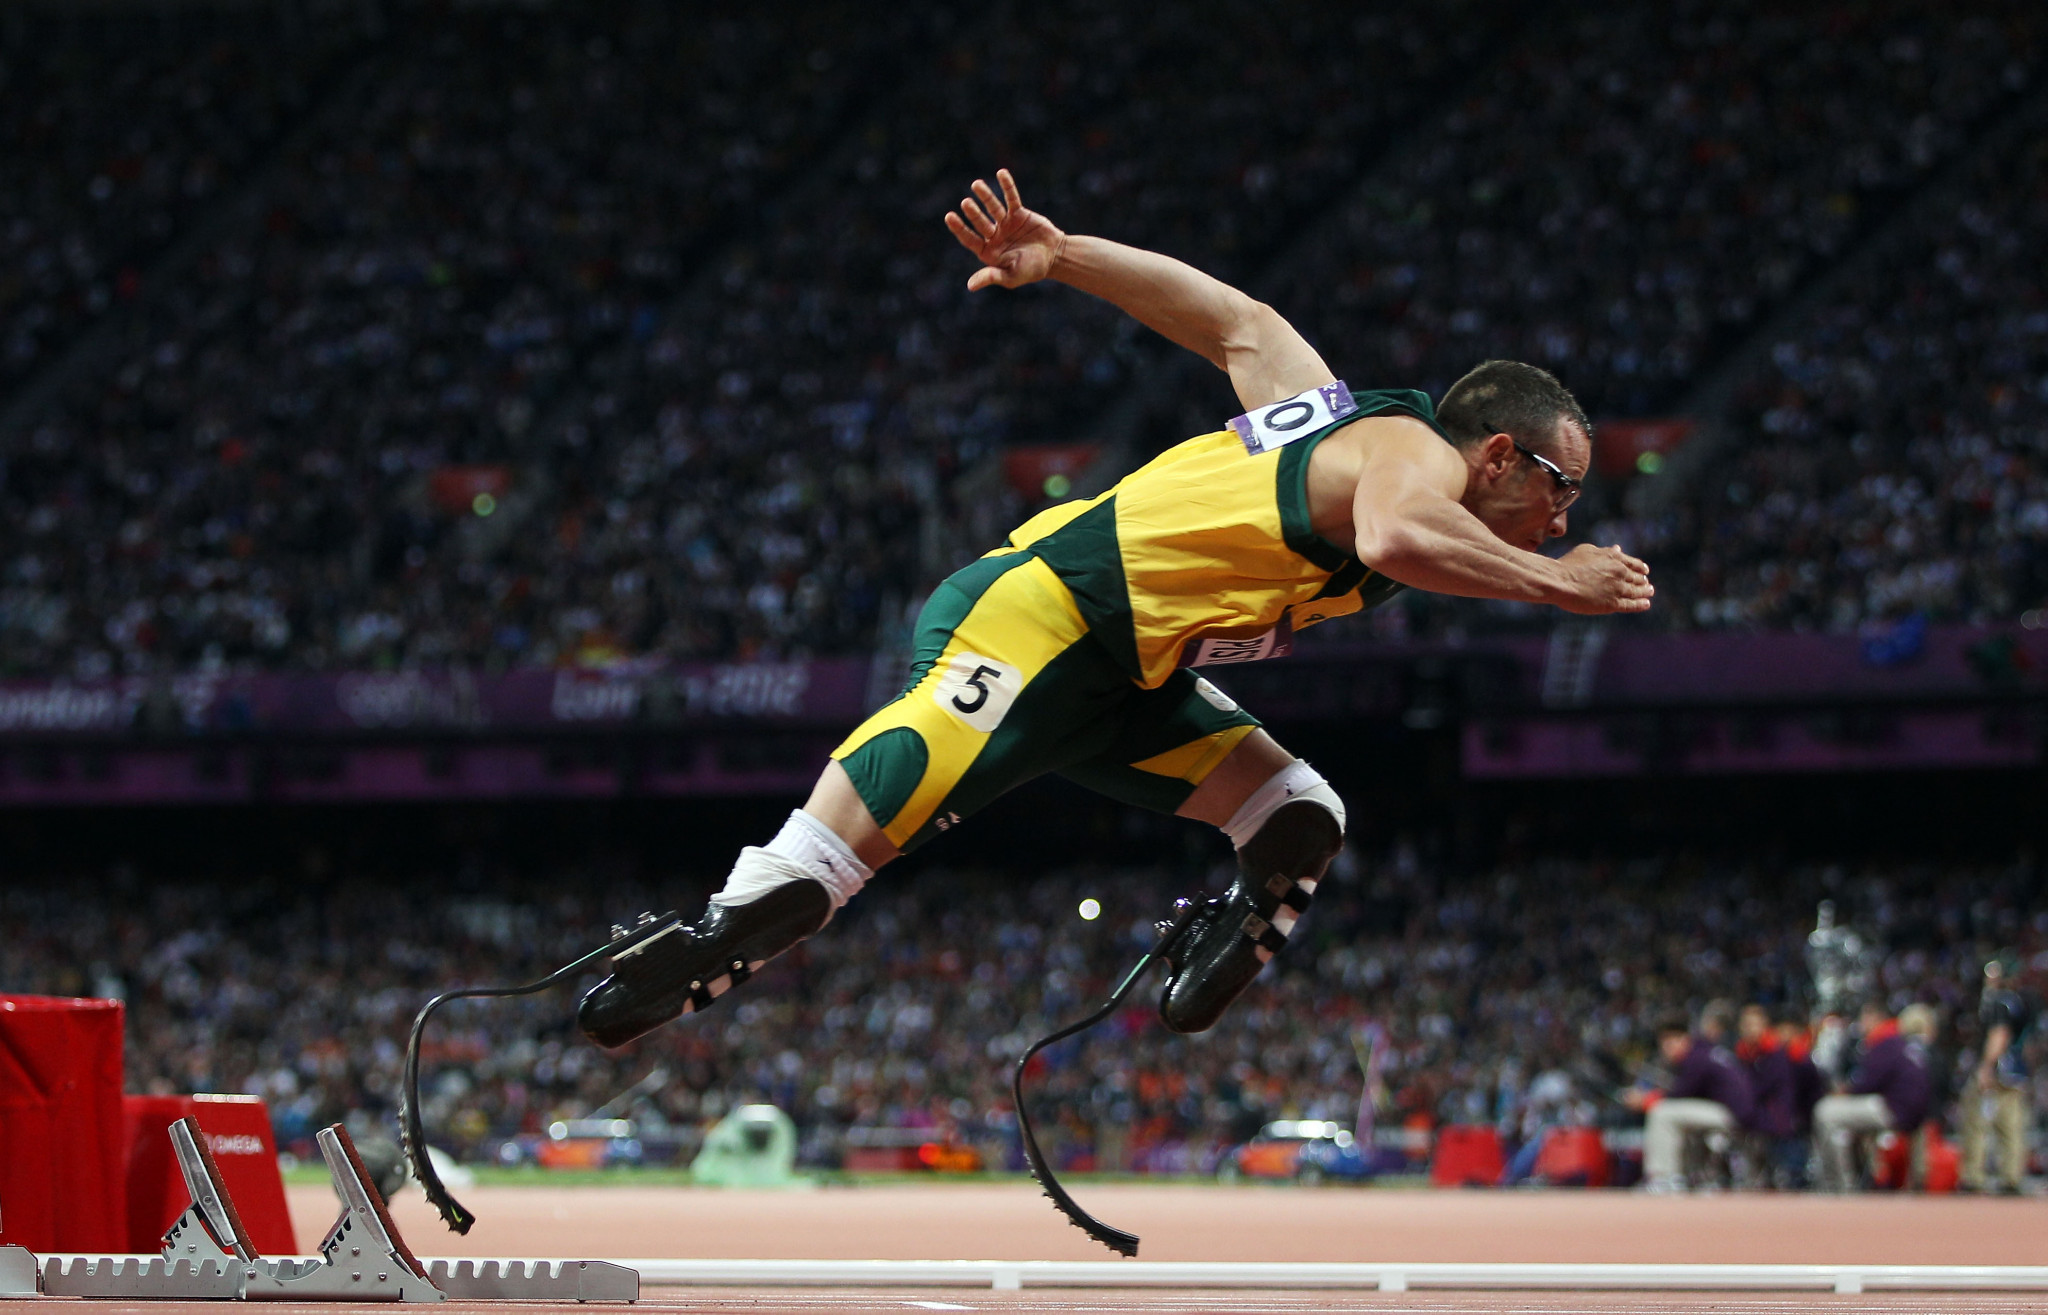 Pistorius appearance on London 2012 highlights sees BBC receive social media criticism